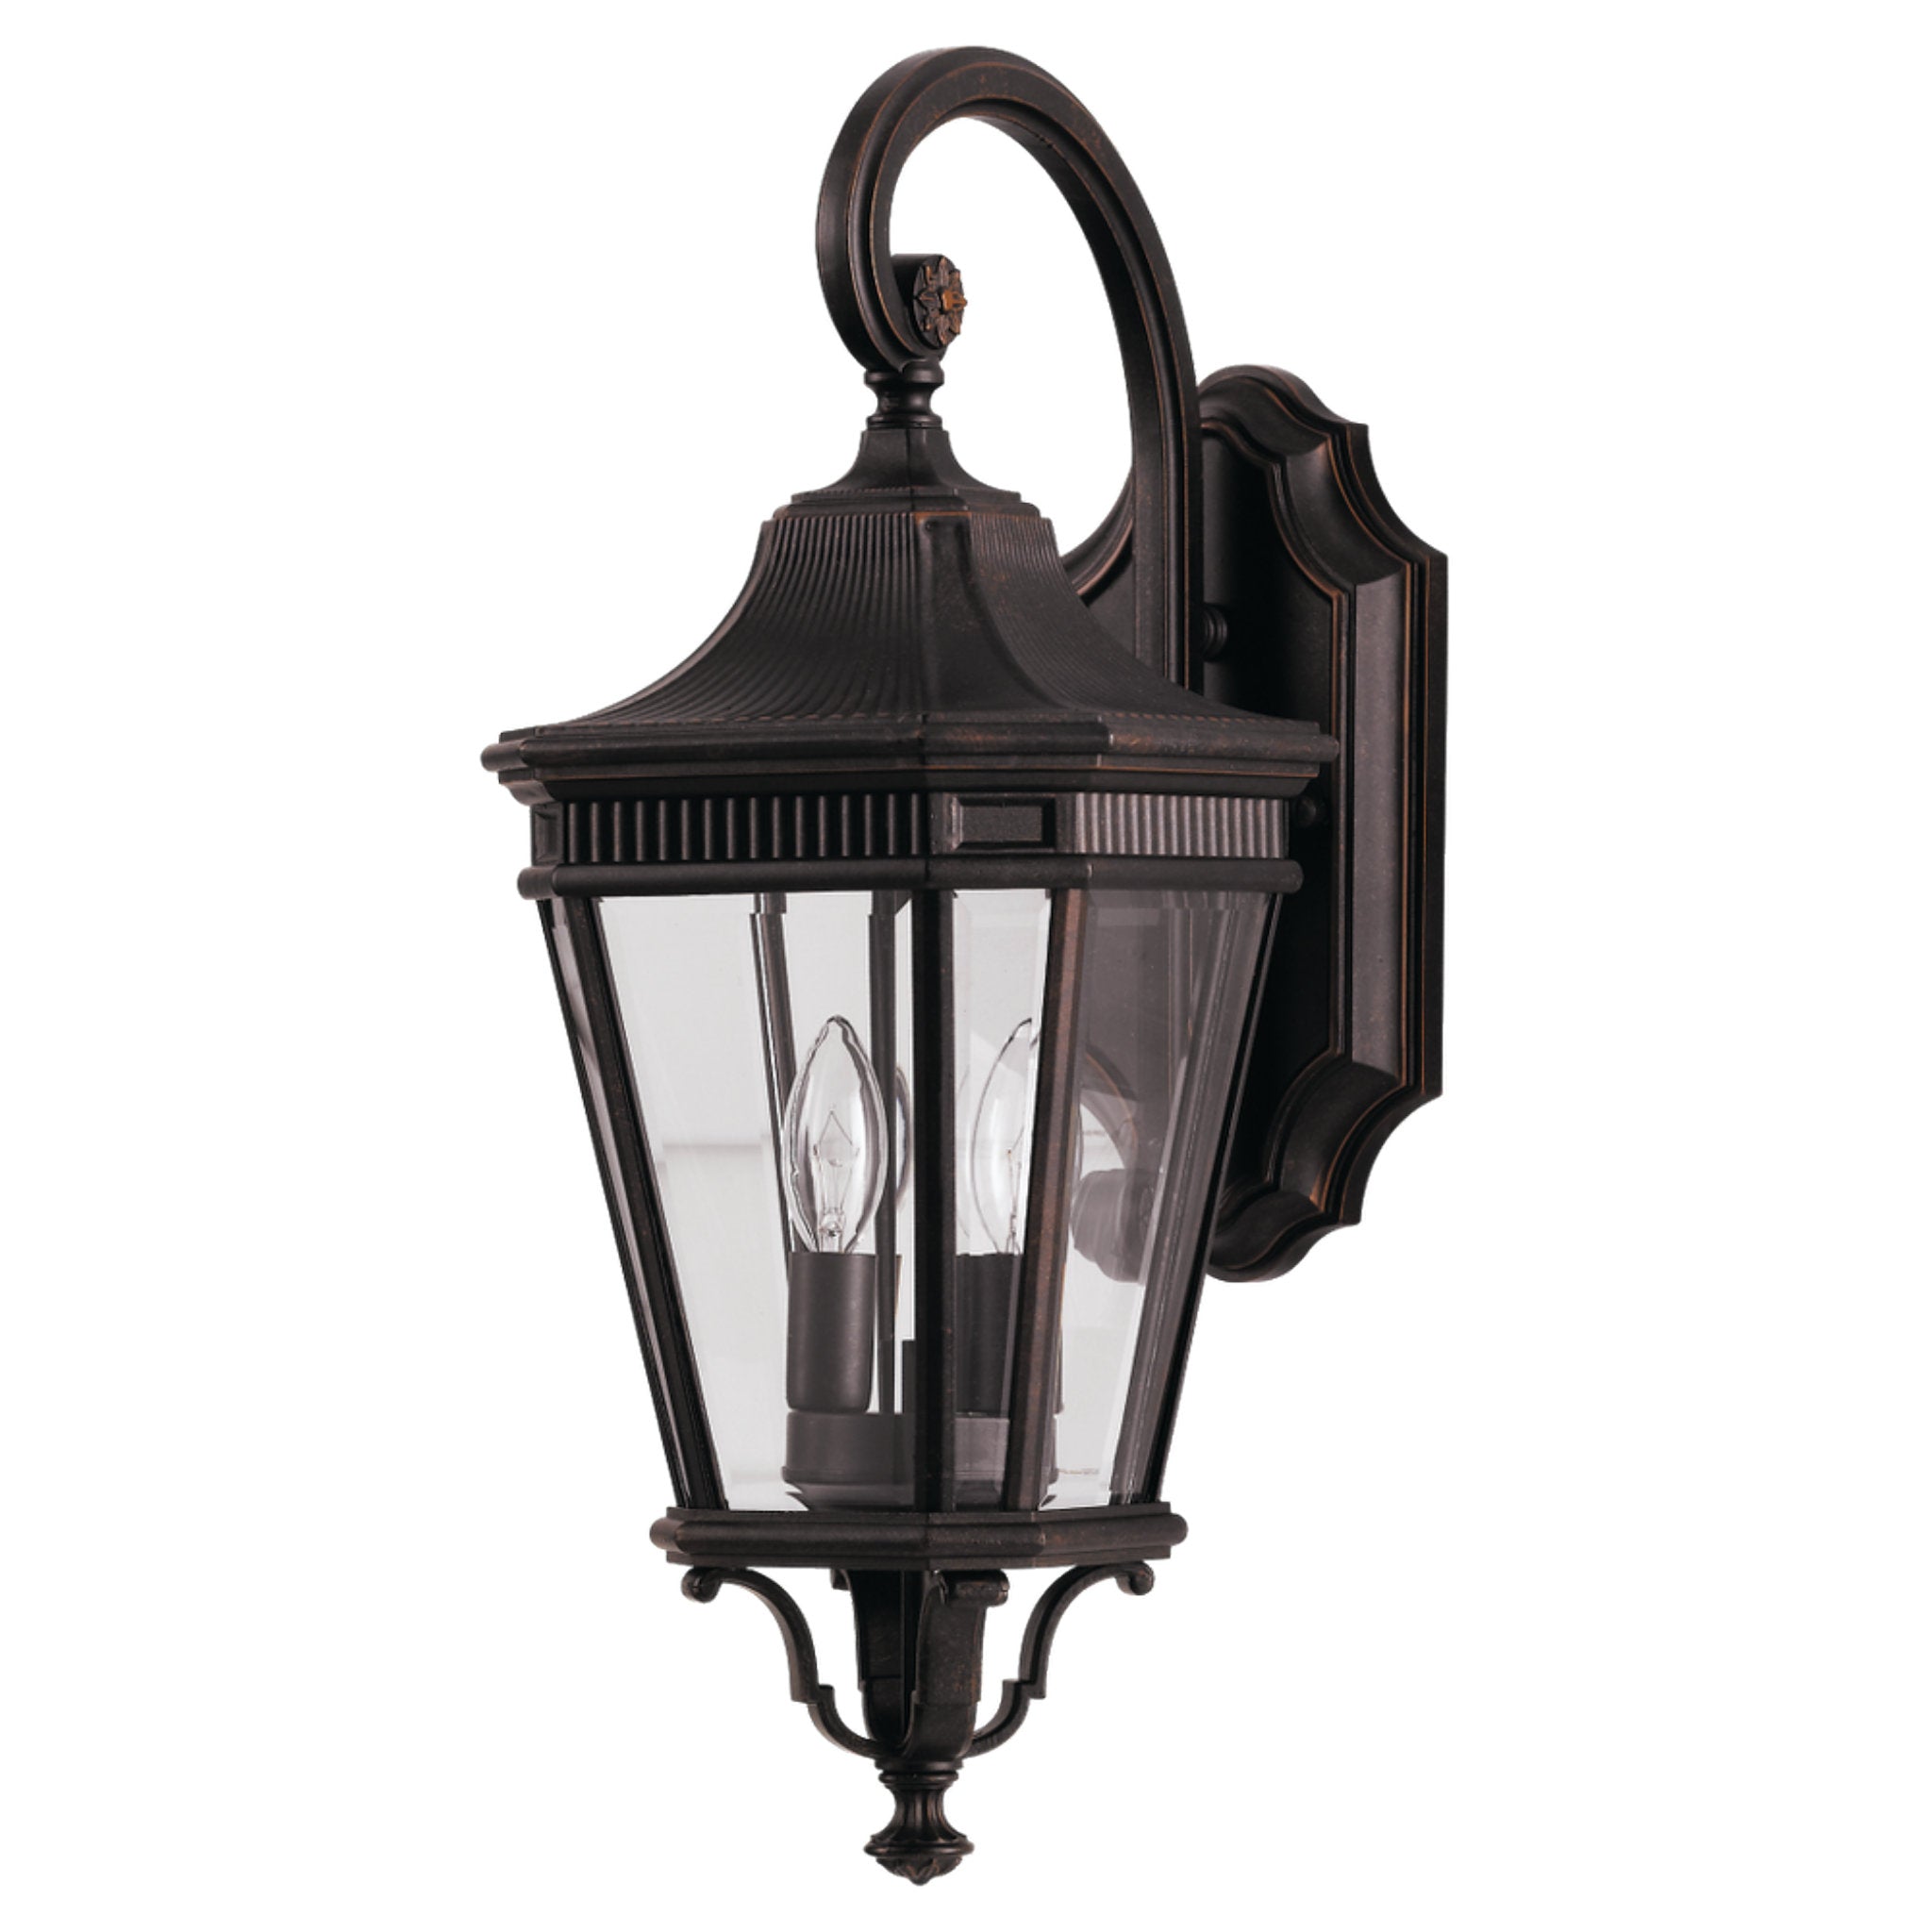 Cotswold Lane Small Lantern Traditional Outdoor Fixture 9" Width 20.5" Height Aluminum Irregular Clear Beveled Shade in Grecian Bronze